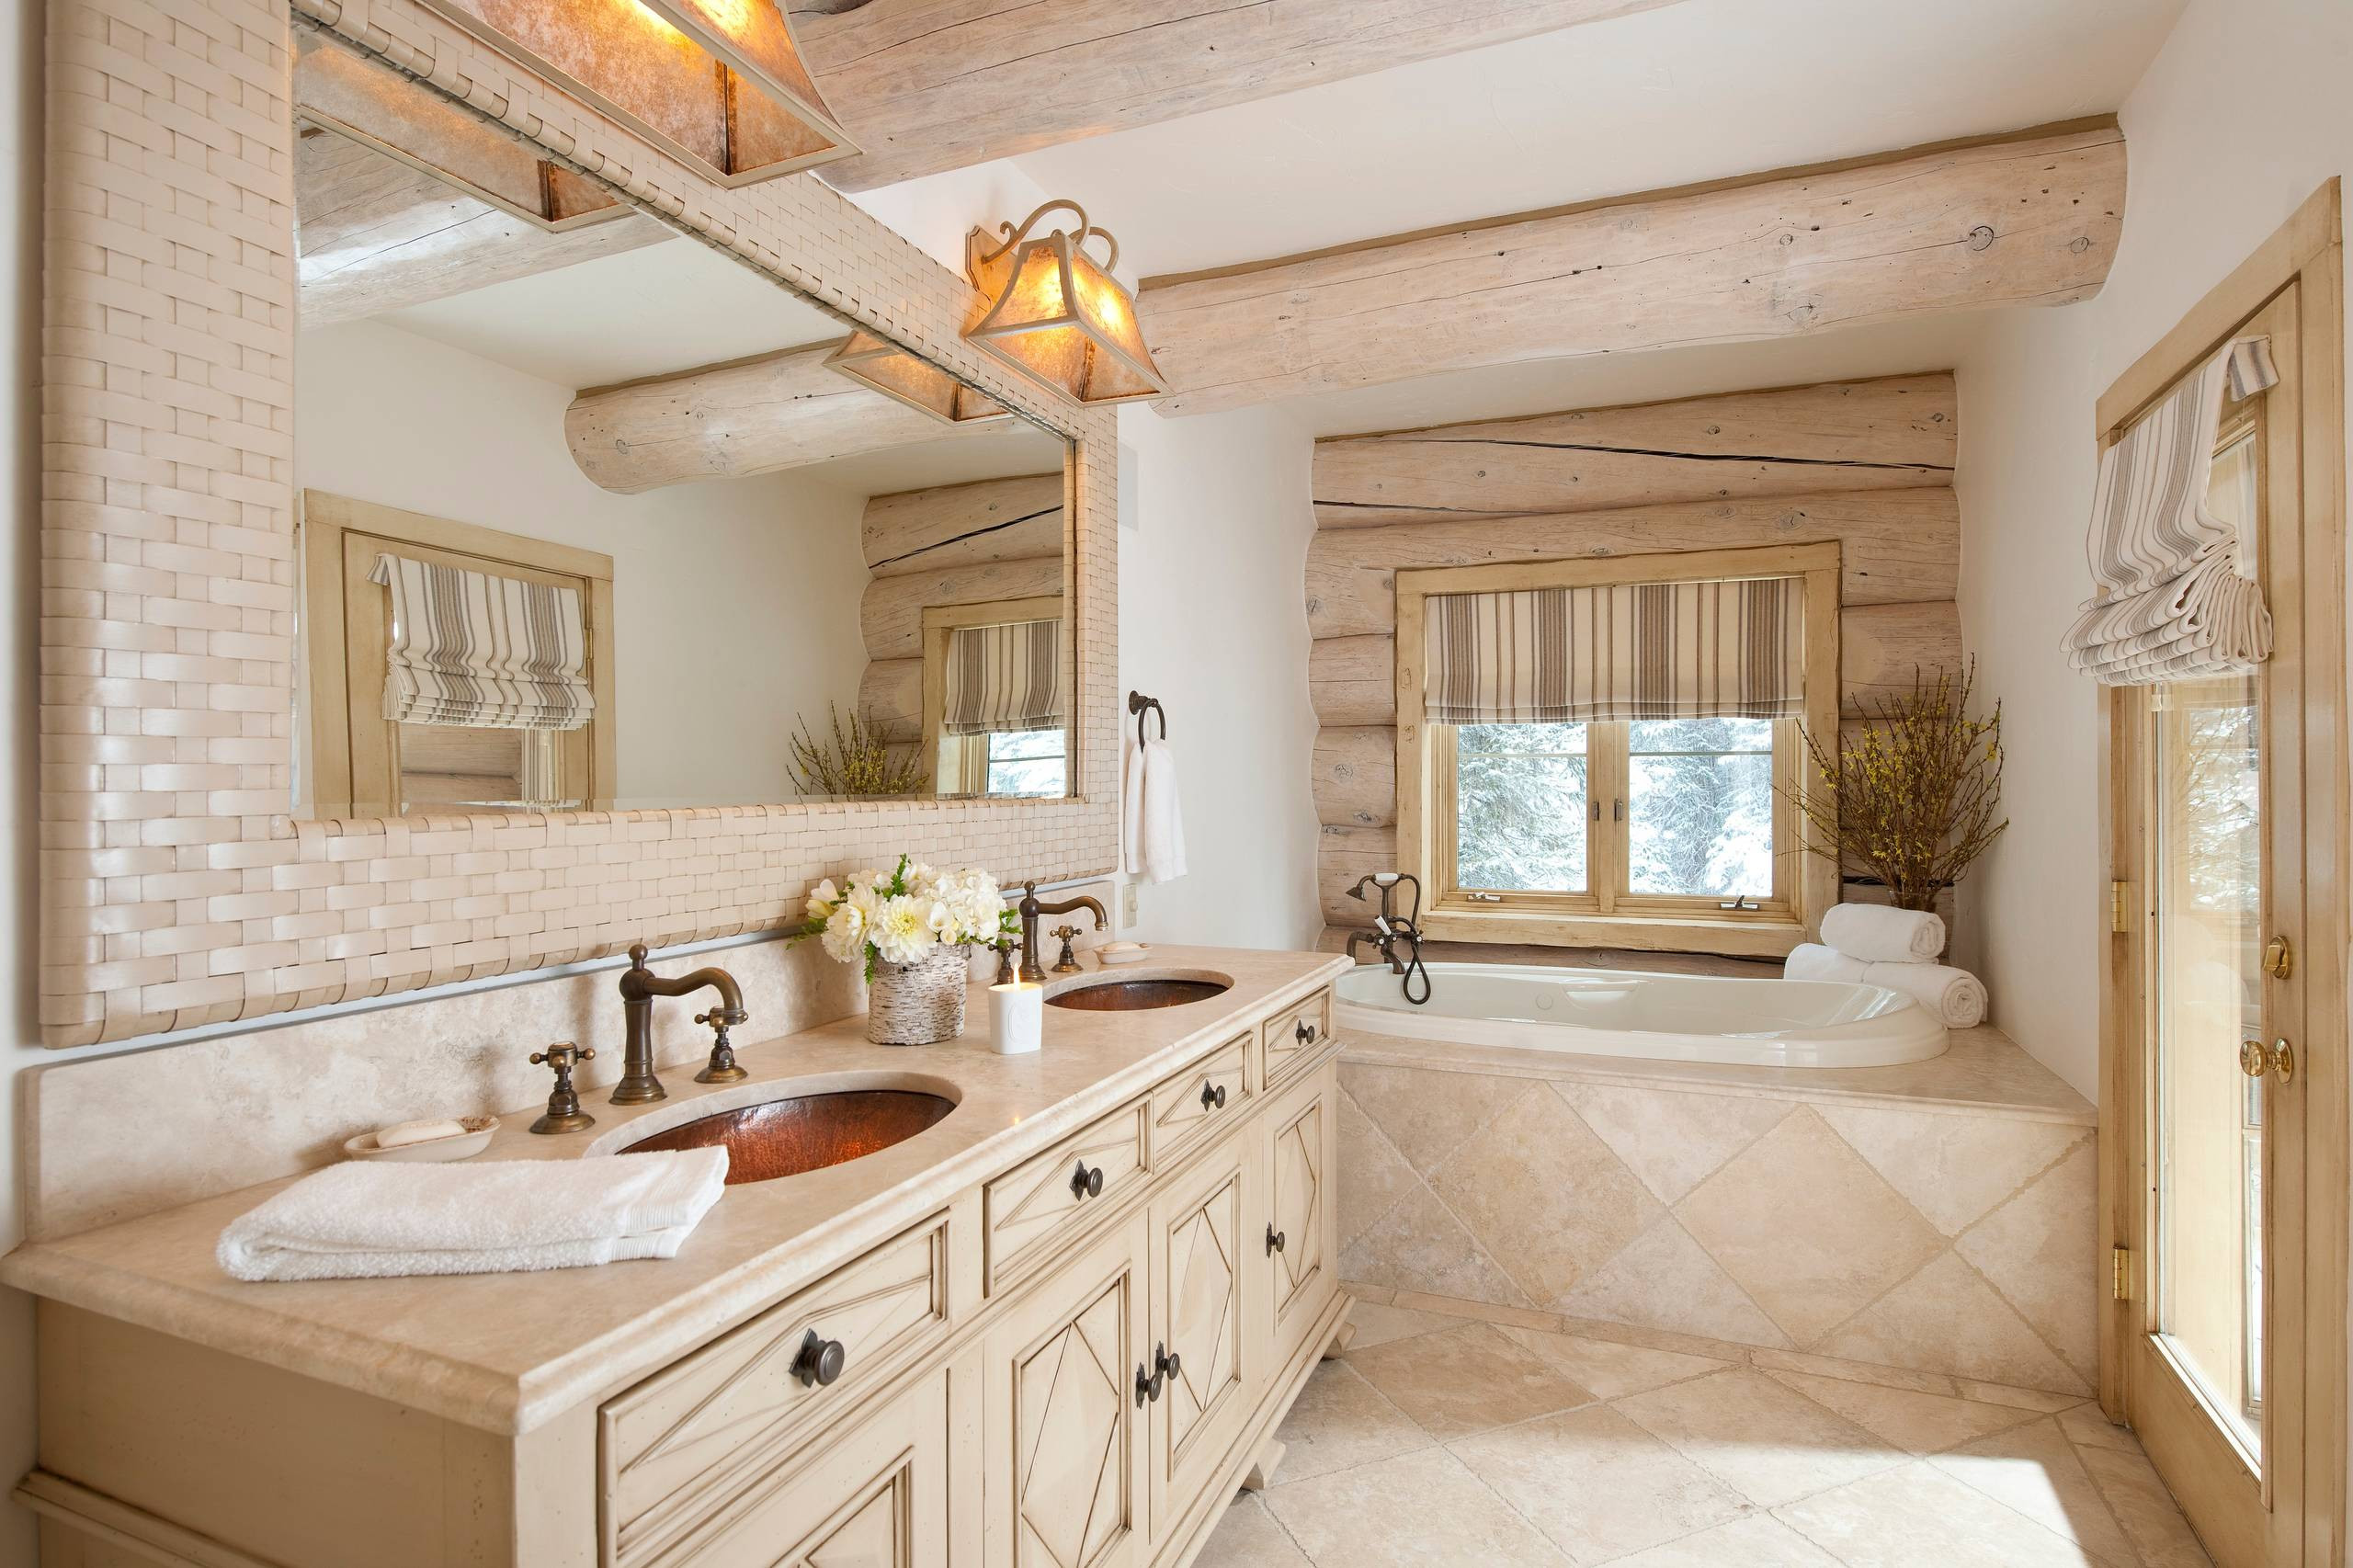 Bathroom Design Pictures
 16 Fantastic Rustic Bathroom Designs That Will Take Your